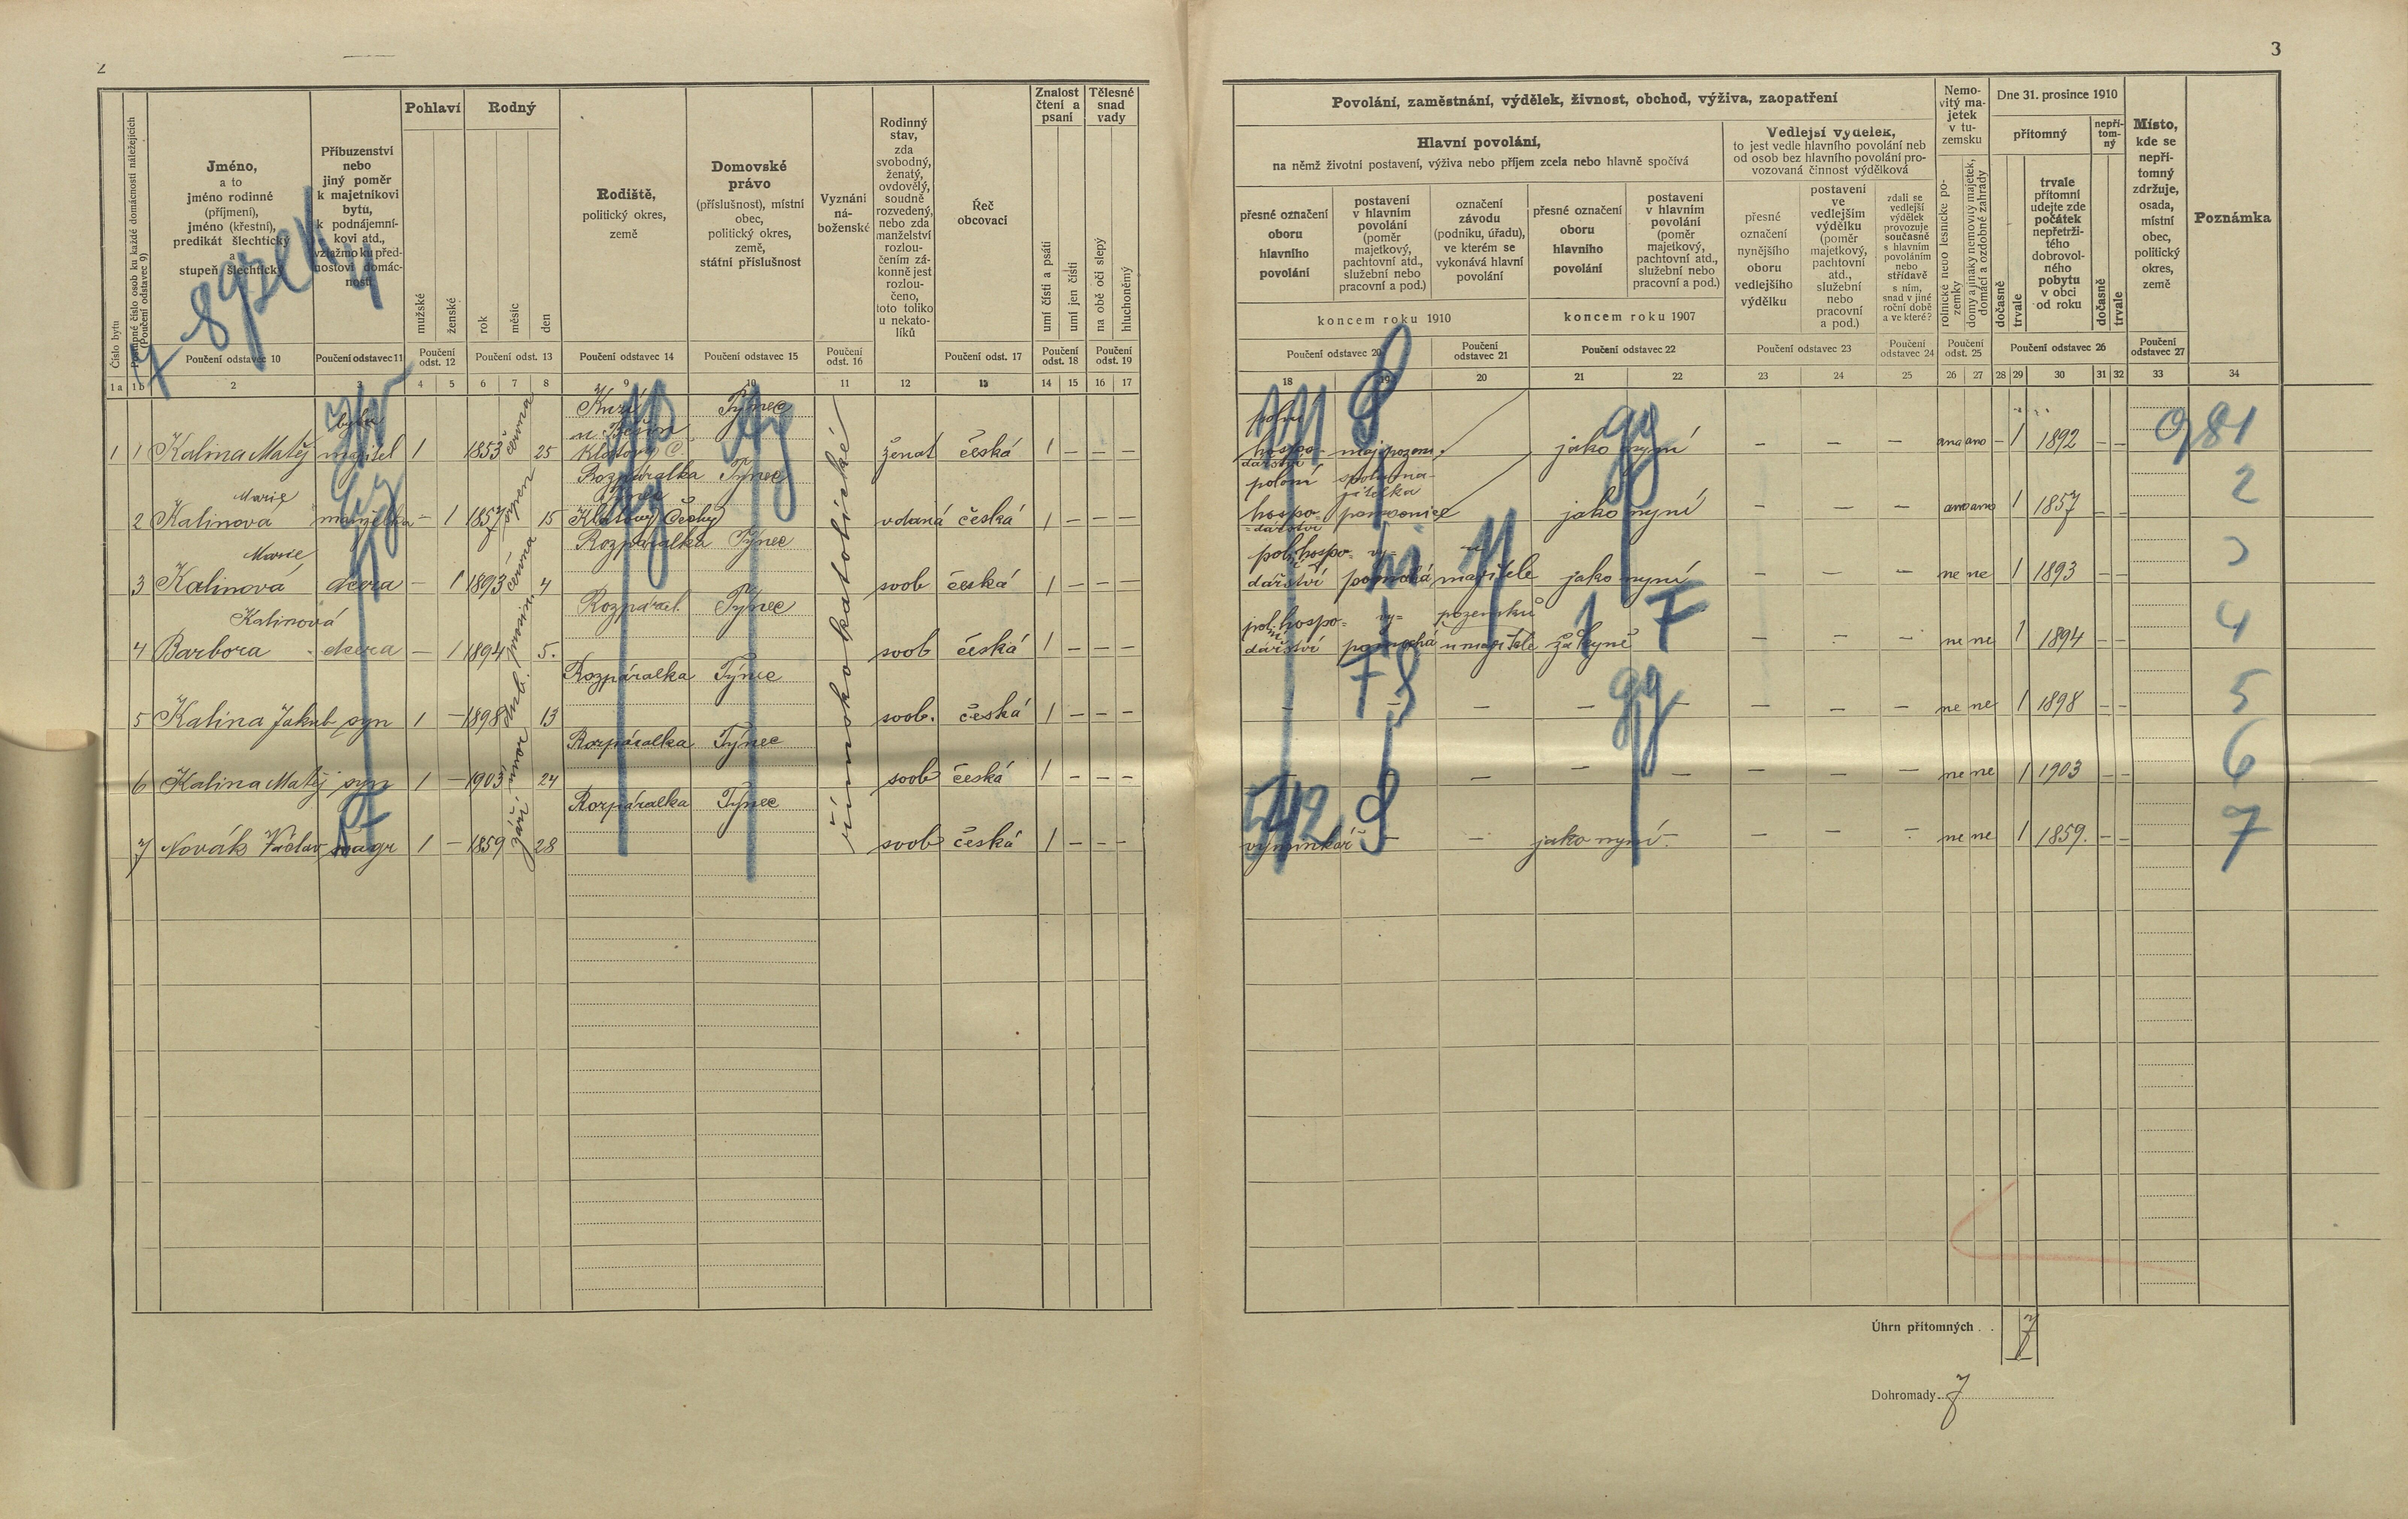 2. soap-kt_01159_census-1910-tynec-rozparalka-cp002_0020